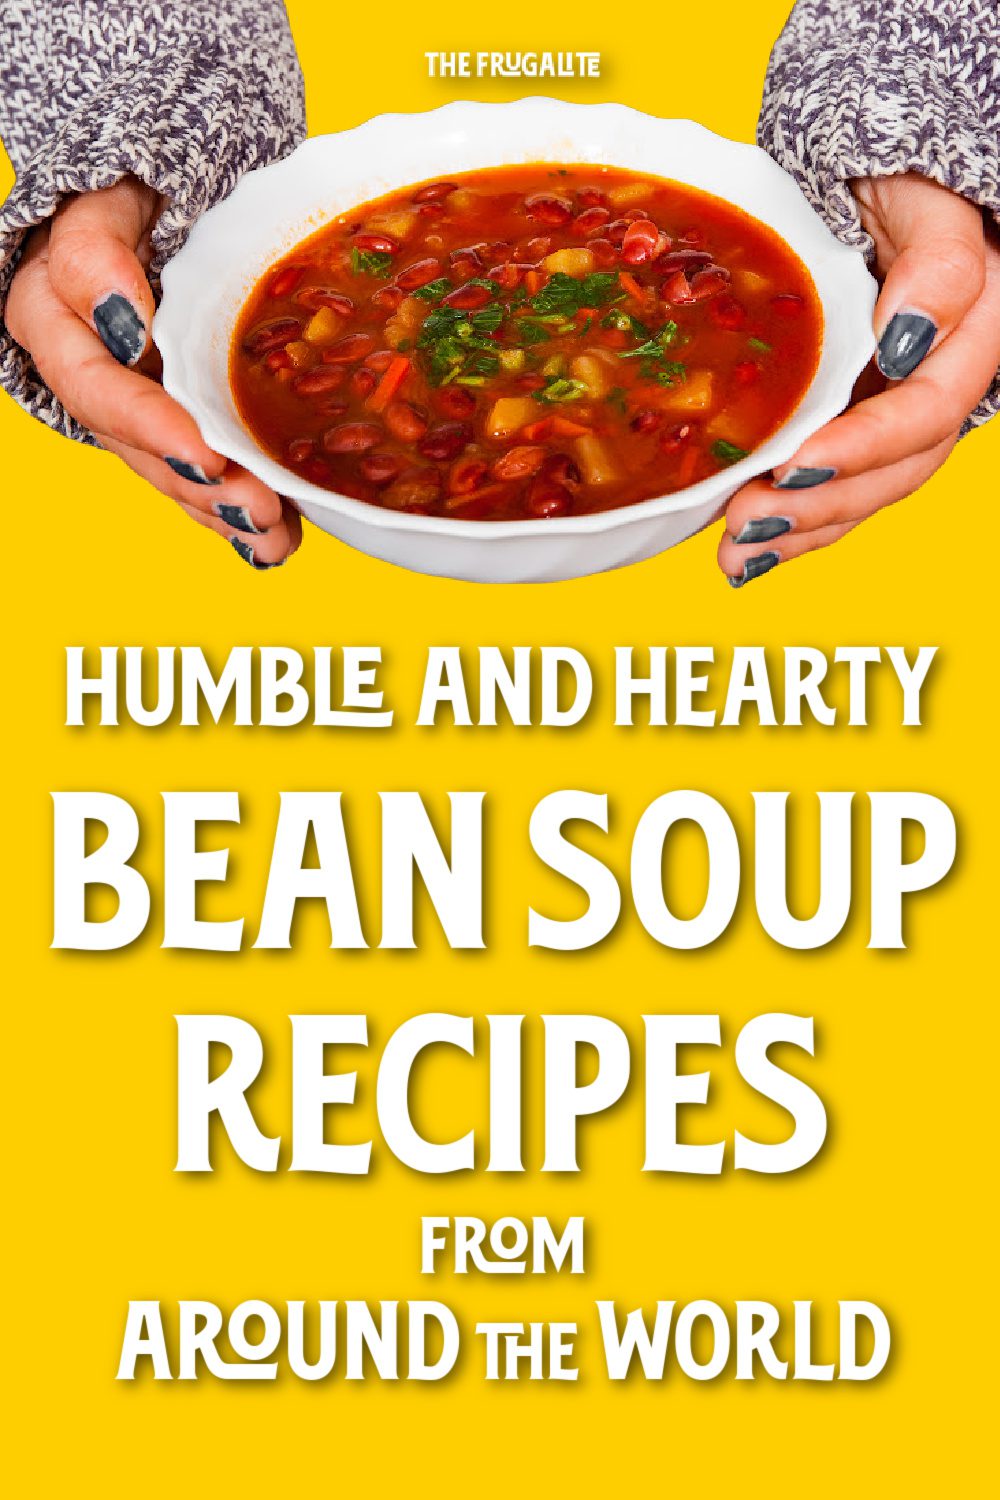 Humble and Hearty Bean Soup Recipes from Around the World